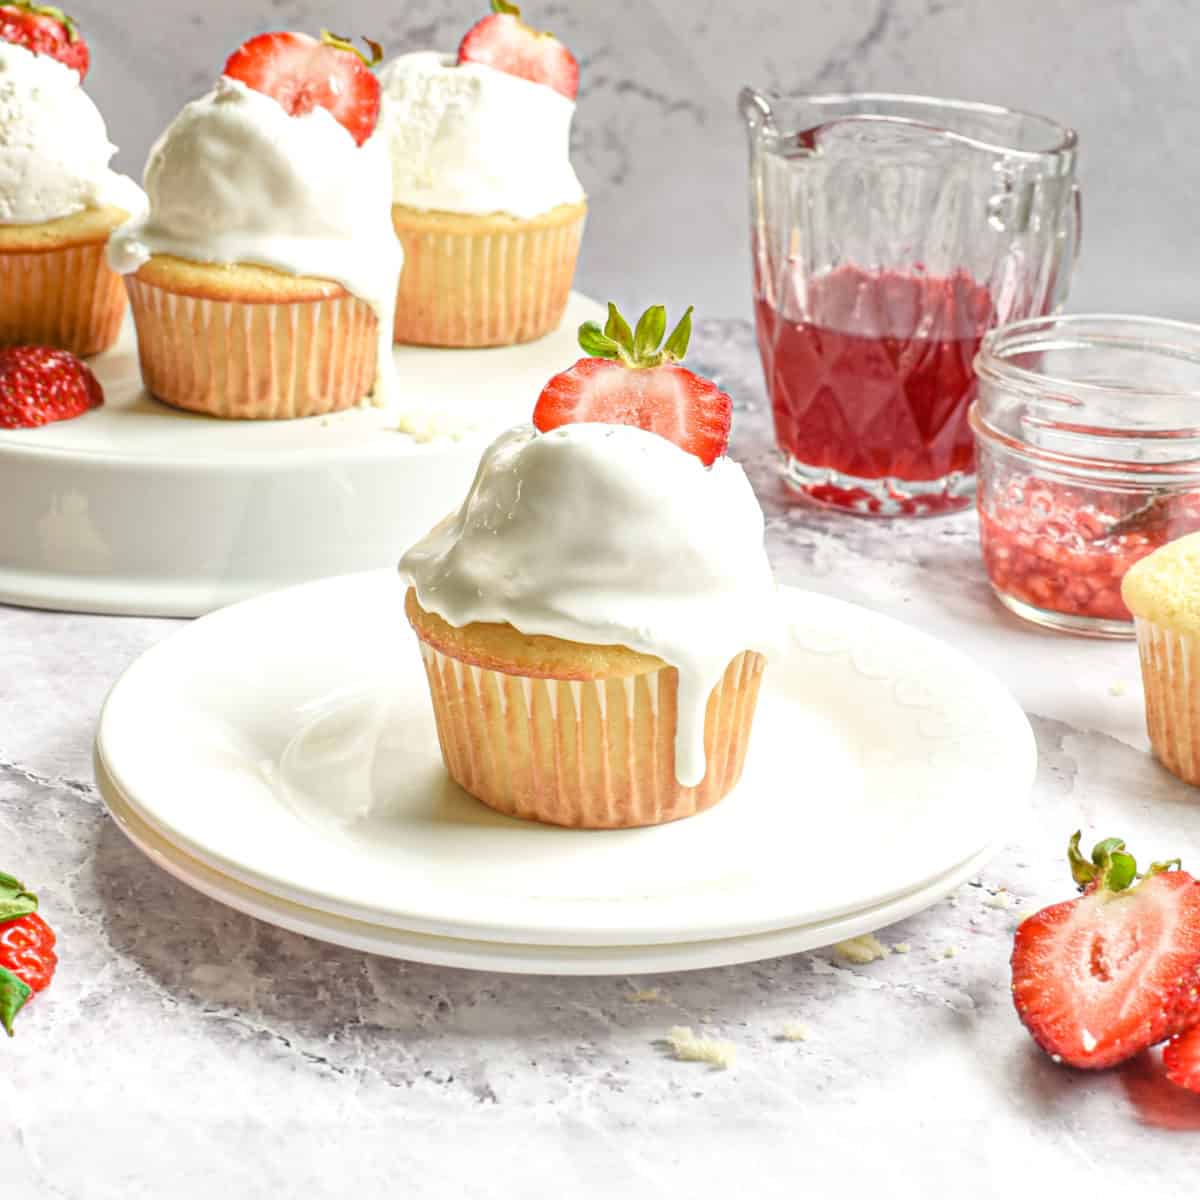 A cupcake on a plate topped with a fresh strawberry halve.